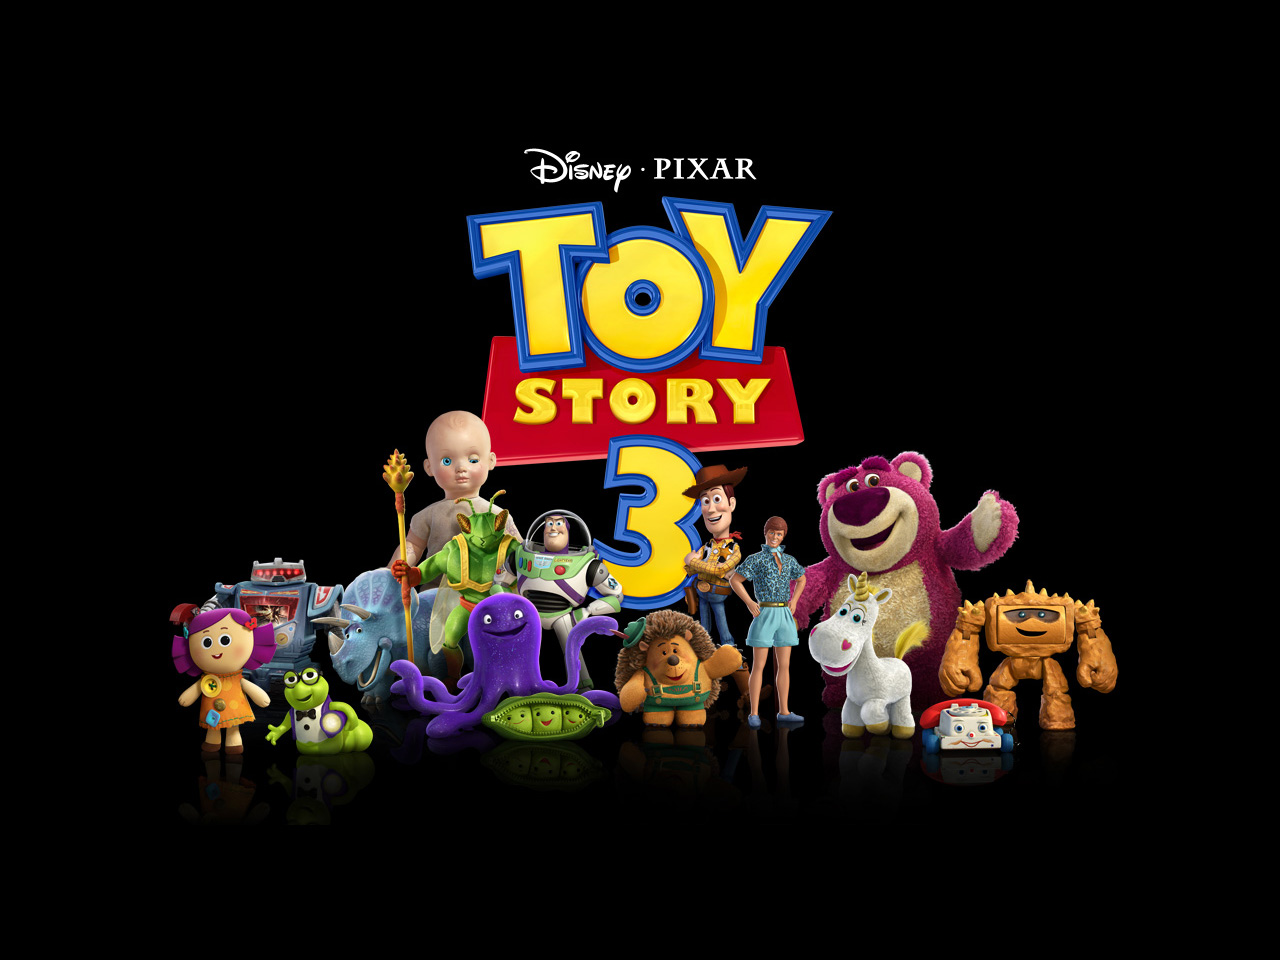 toy story 3 pc torrent download tpb